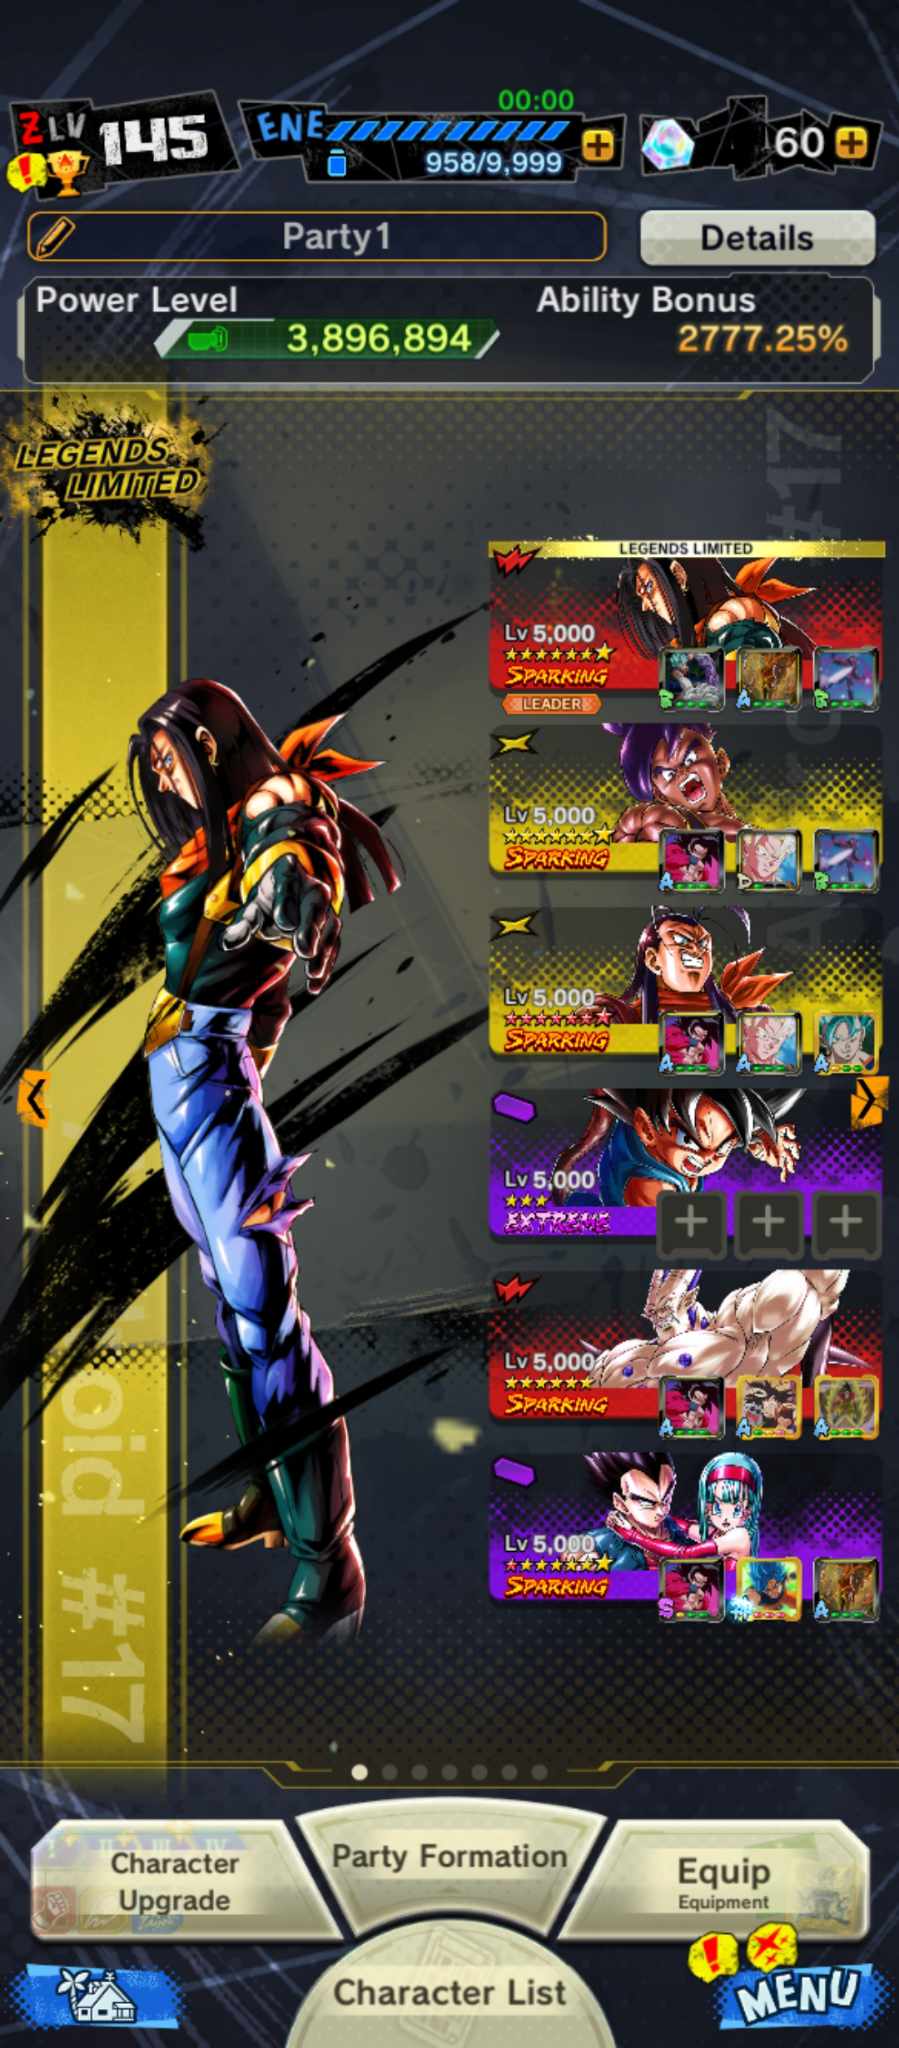 ANDROID, LOGIN BANDAI, 5 legend limited, Android 17 full stars, Soul 10k